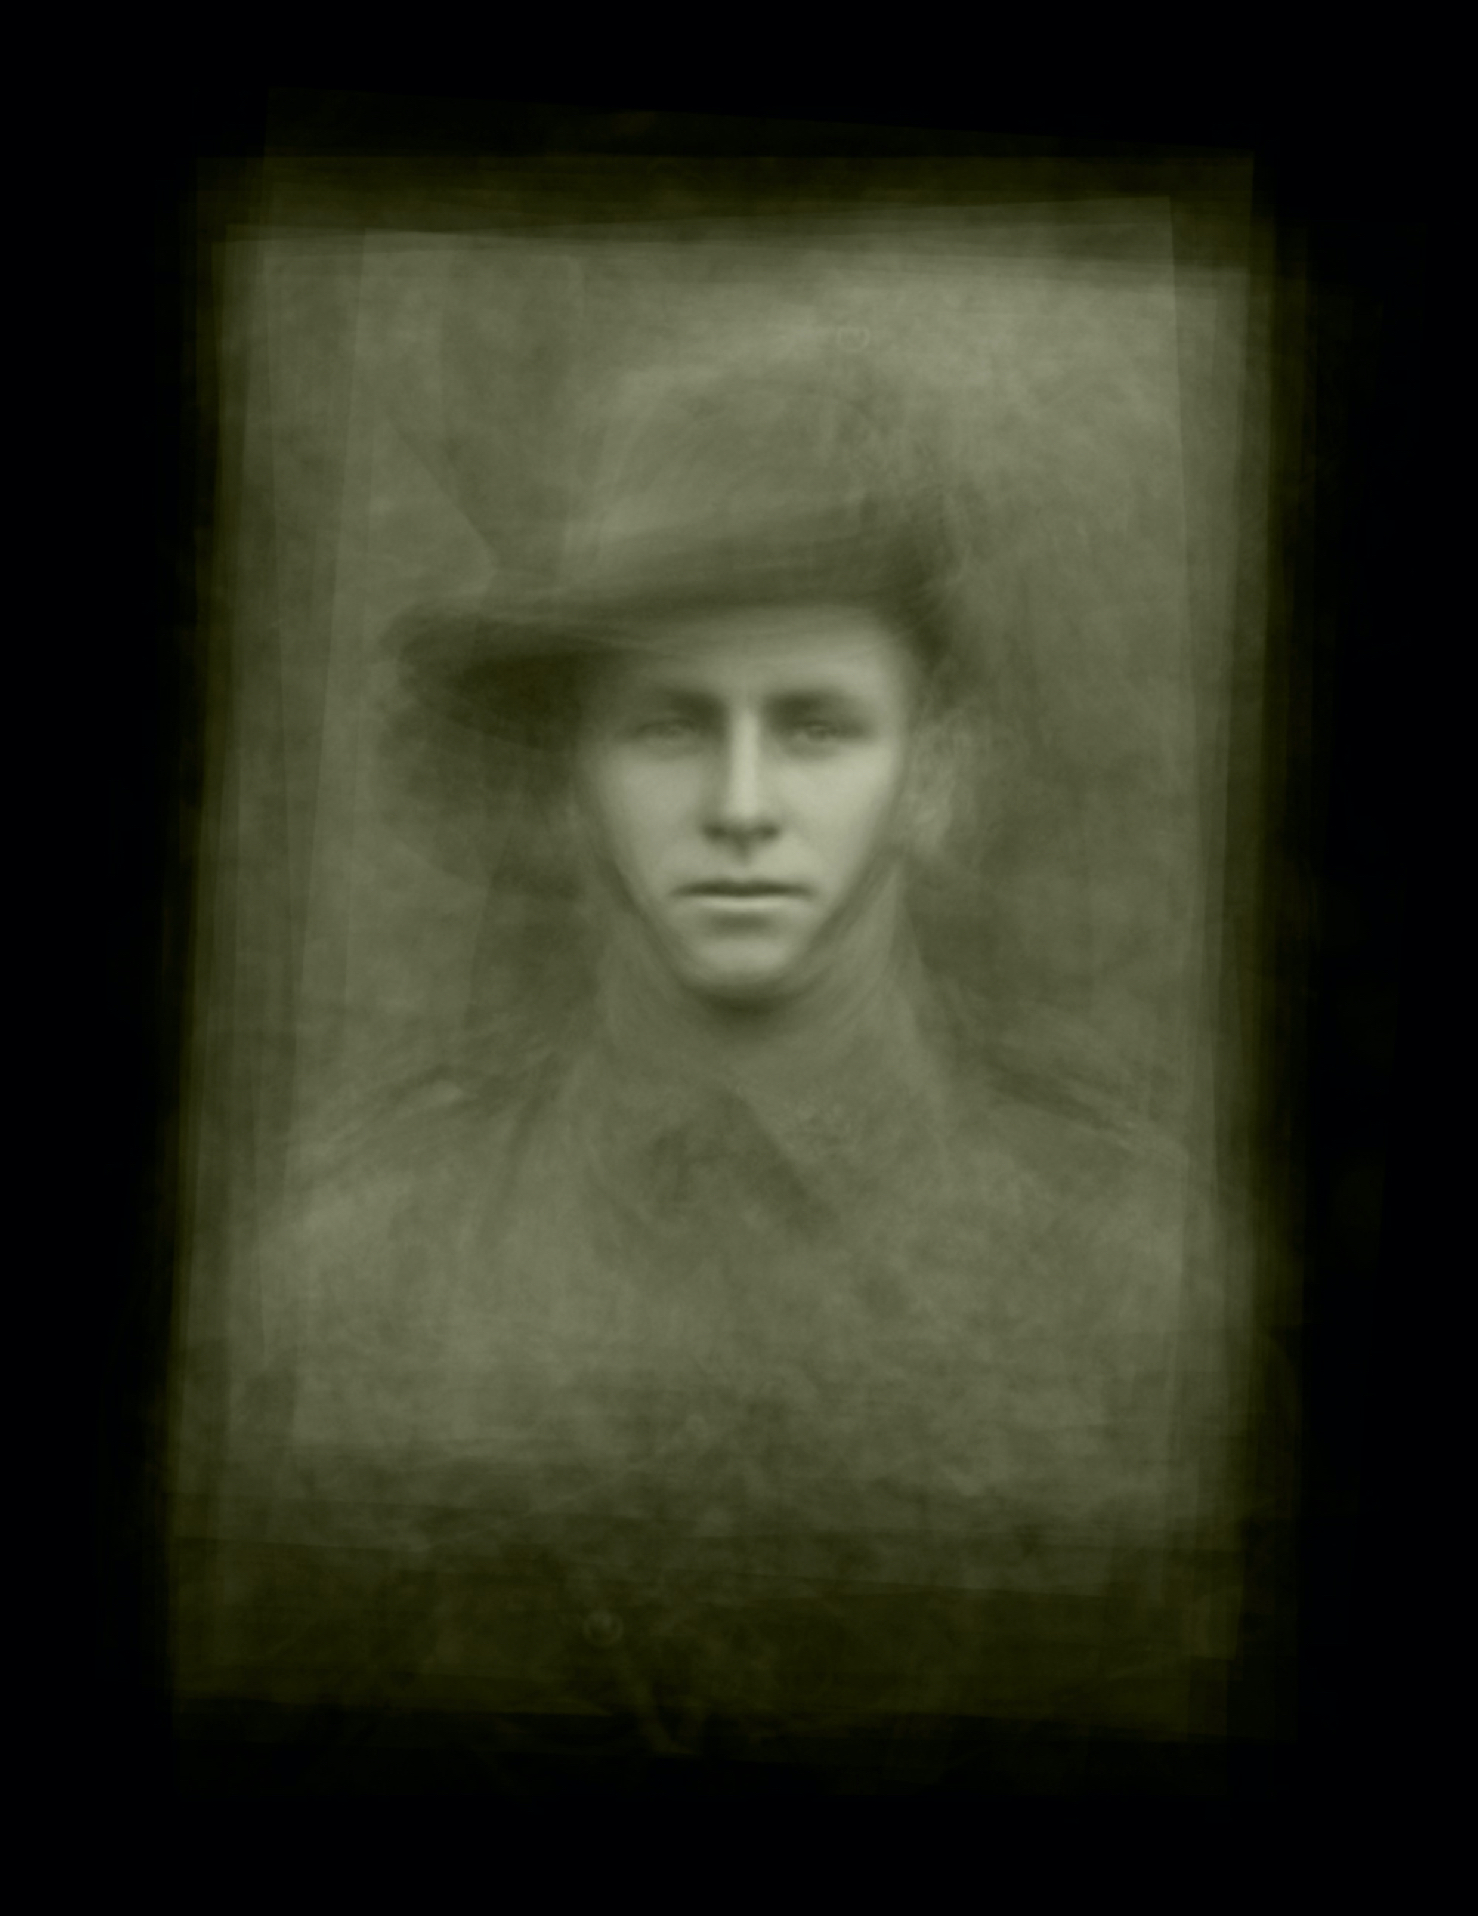 Photograph overlaying images of soldiers in the first world war